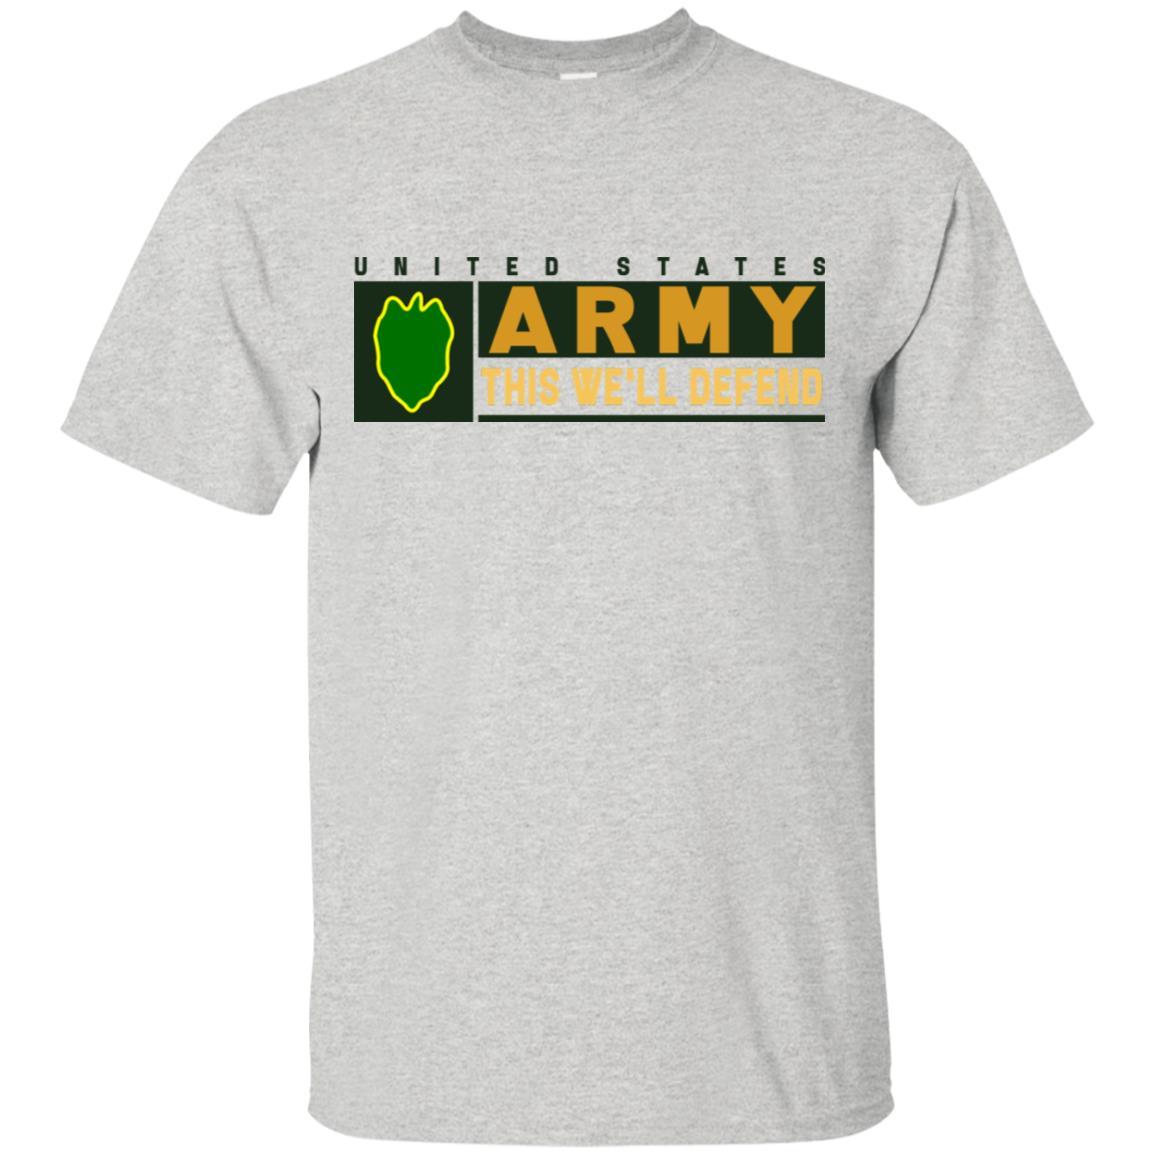 US Army 24th Infantry Division- This We'll Defend T-Shirt On Front For Men-TShirt-Army-Veterans Nation